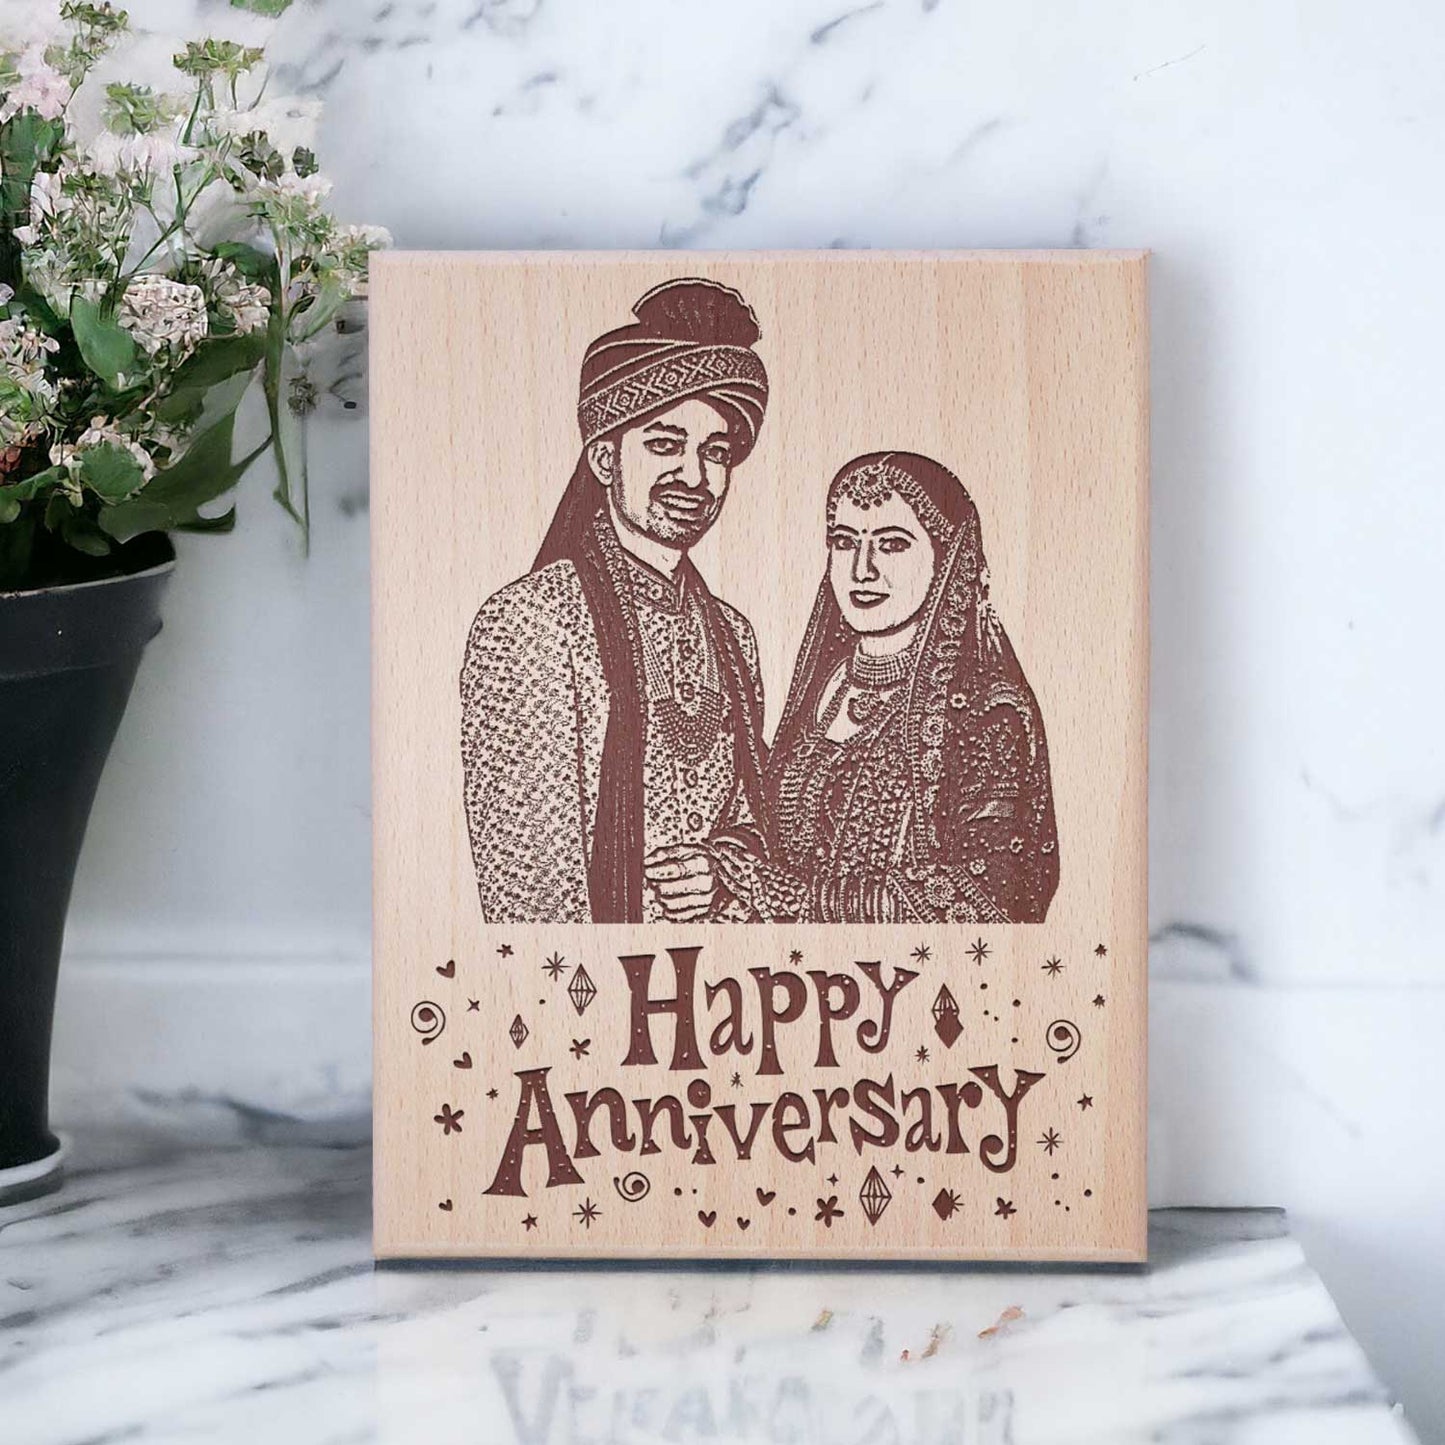 Personalized Engraved Wooden Photo Frame For First Anniversary